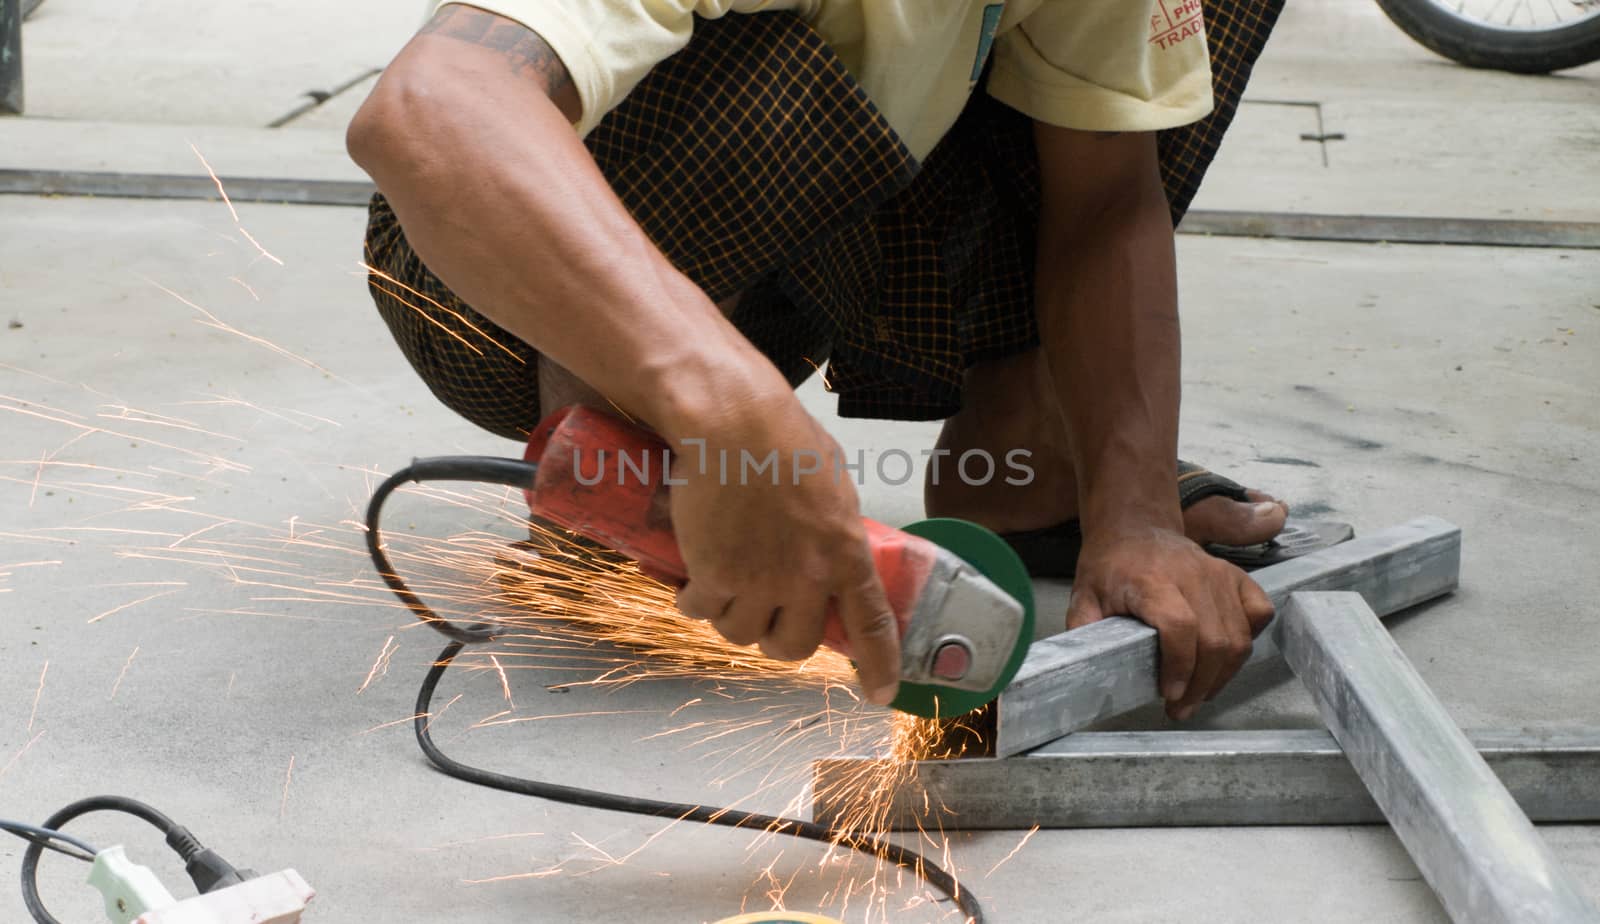 WORKER CUTTING STEEL WITH ELECTRIC WHEEL GRINDER by PrettyTG